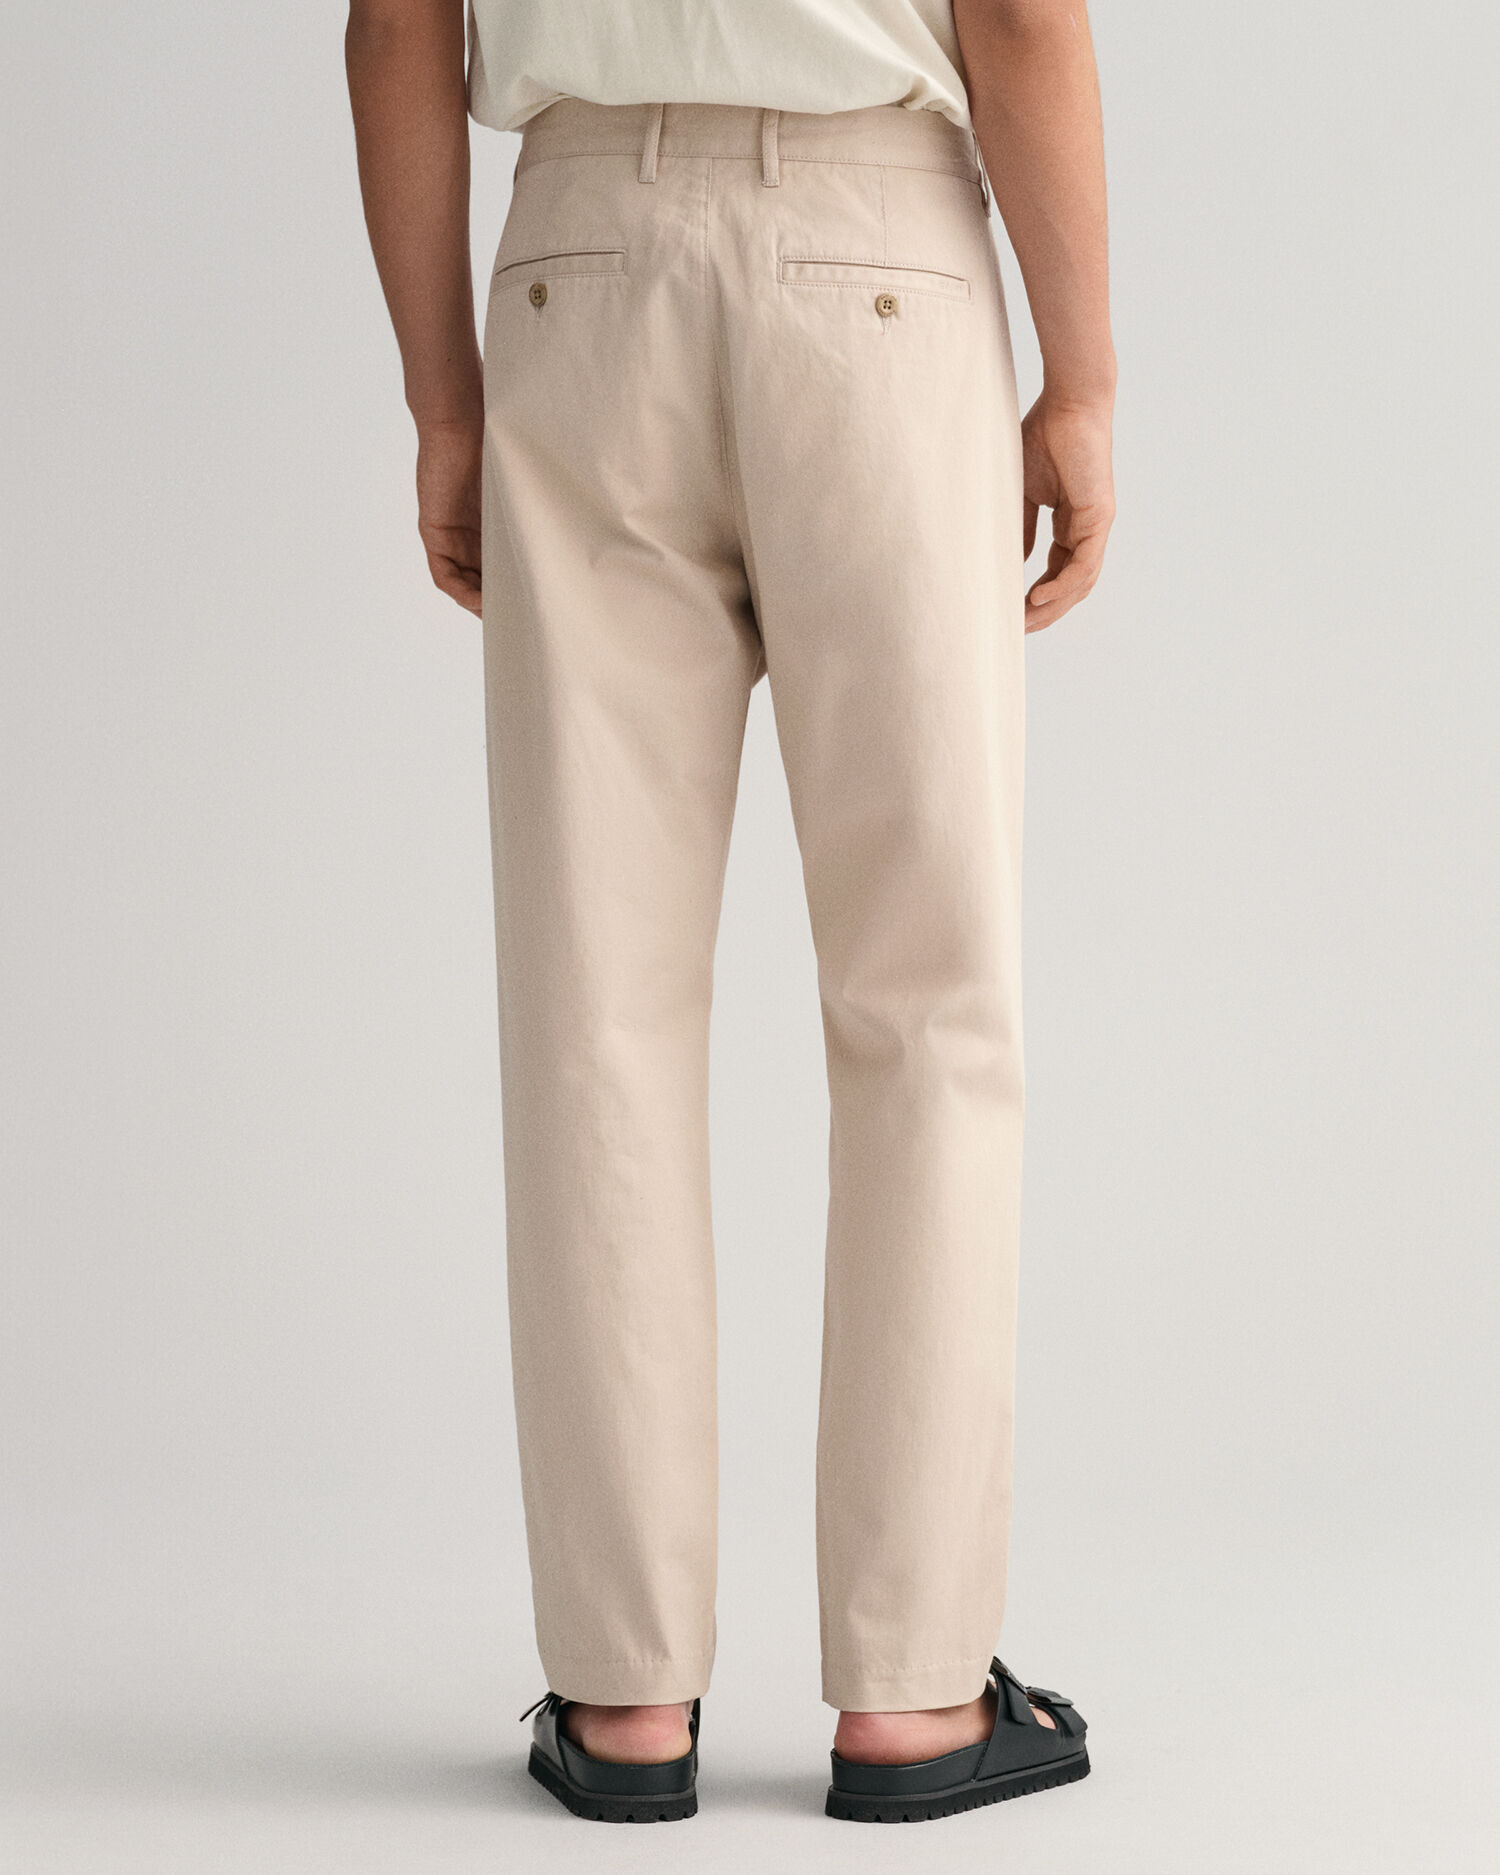 Buy Green Trousers  Pants for Men by British Club Online  Ajiocom